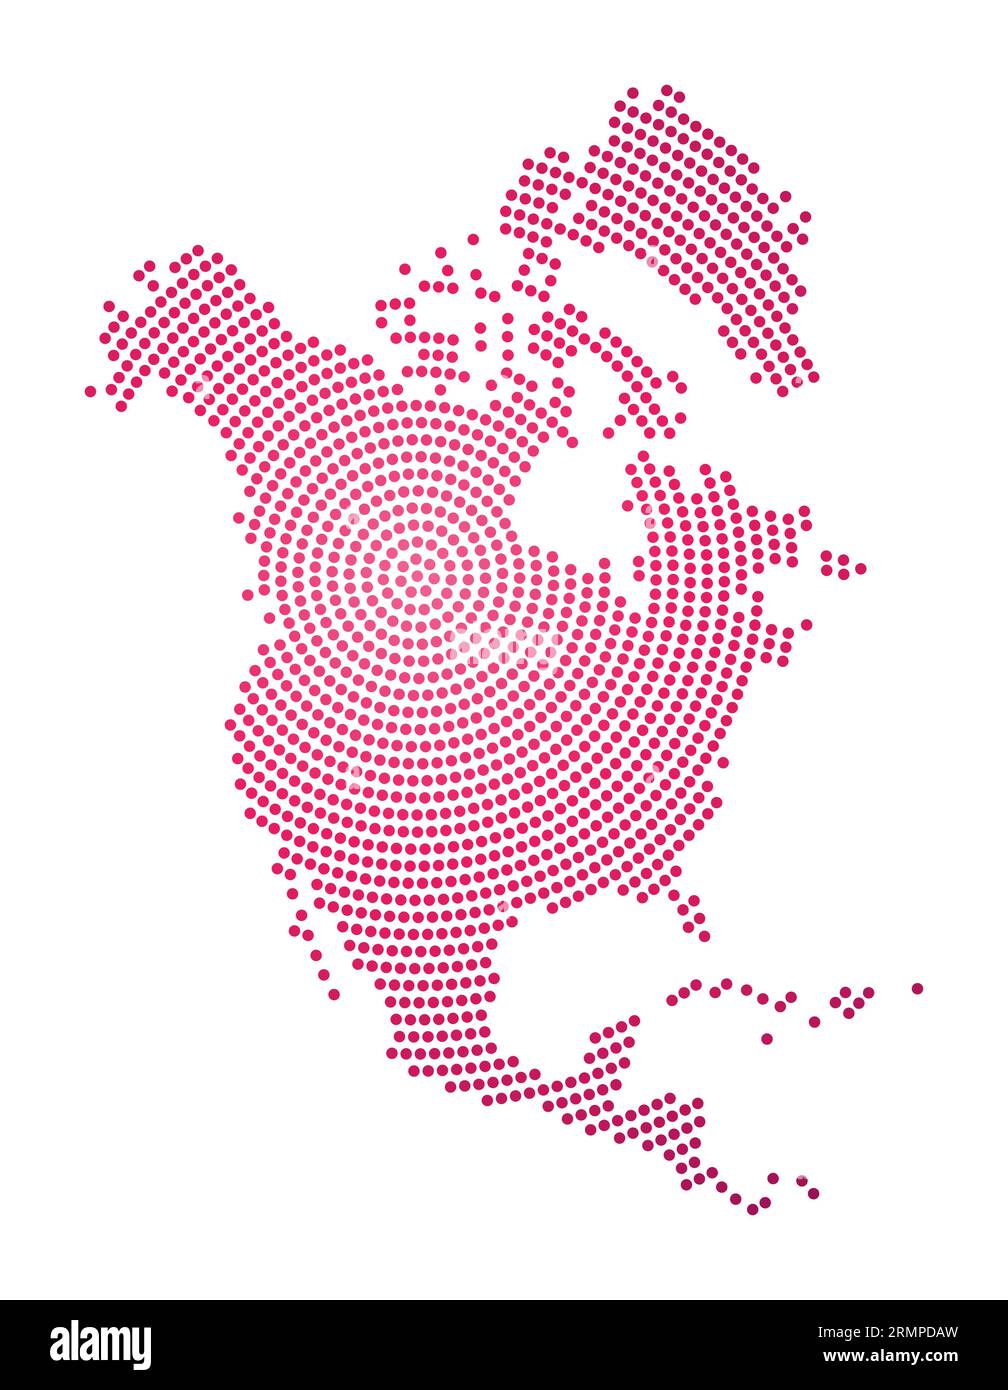 North America dotted map. Digital style shape of North America. Tech icon of the continent with gradiented dots. Astonishing vector illustration. Stock Vector